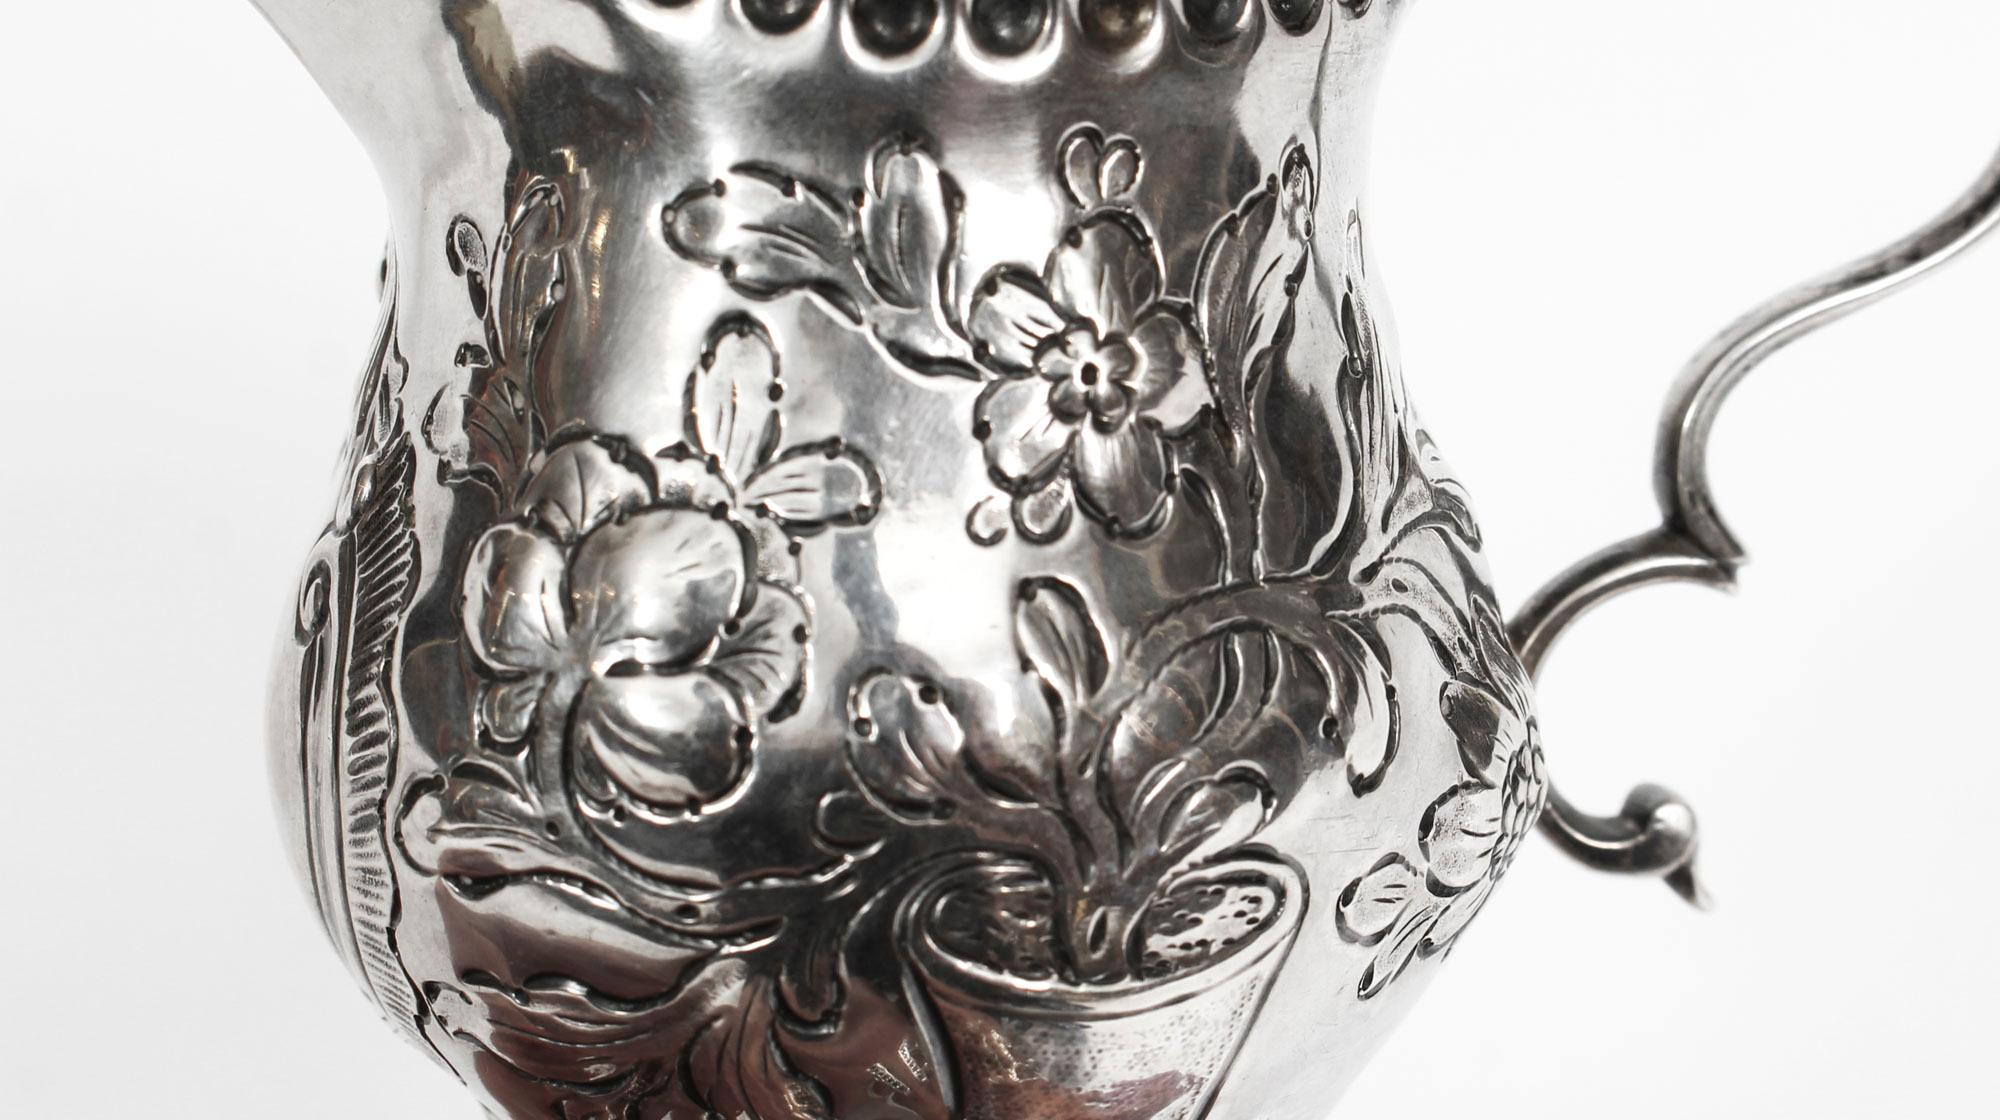 Late 18th Century Antique English George III Sterling Silver Cream Jug 1770, 18th Century